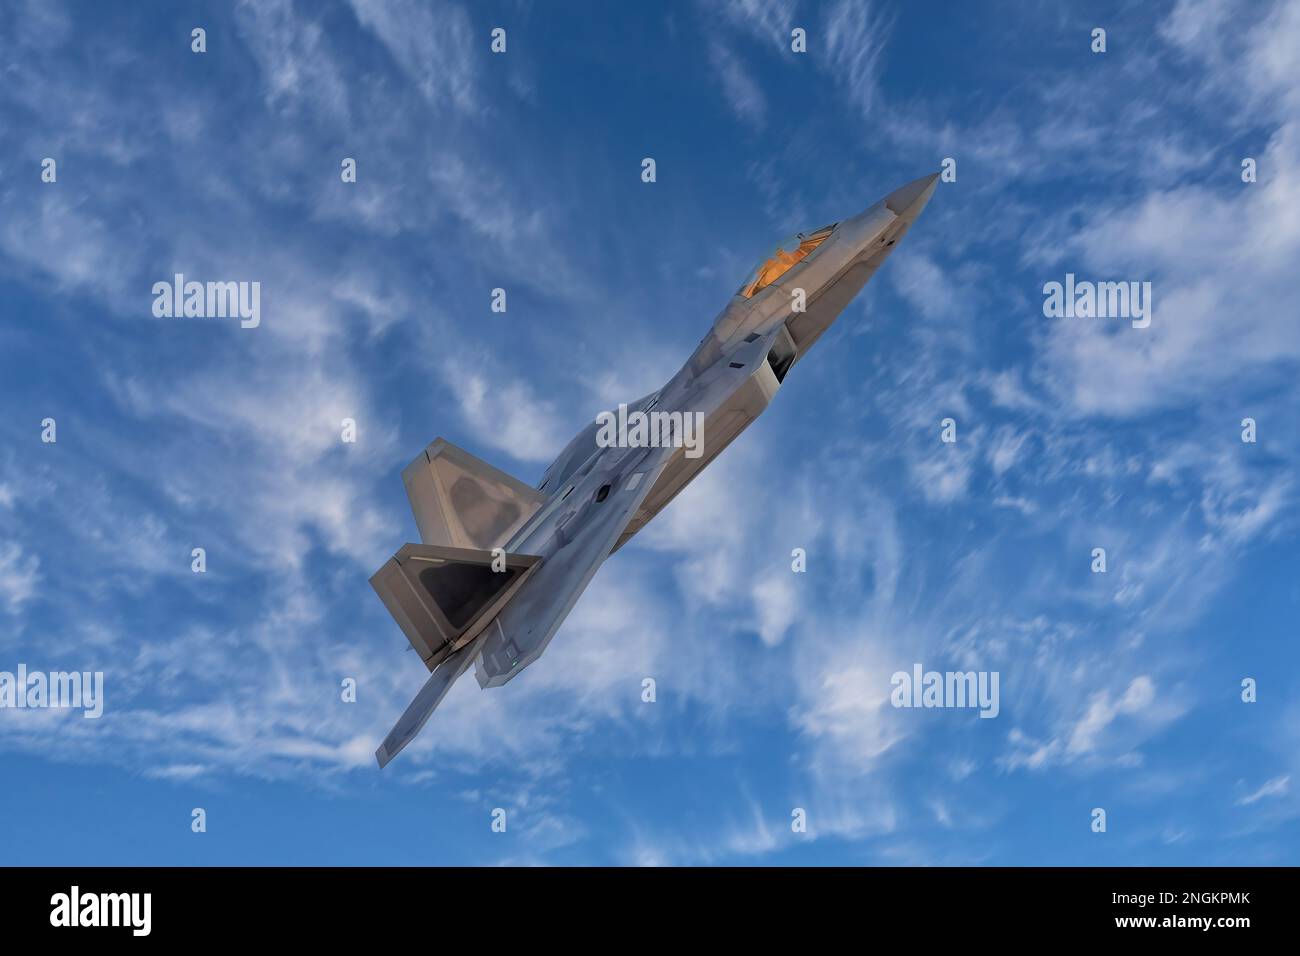 F-22 Raptor Armed Fighter Jet on a combat mission. F22 Raptor jet fighter warplane flying in front of the moon armed with sidewinders and missiles. Stock Photo